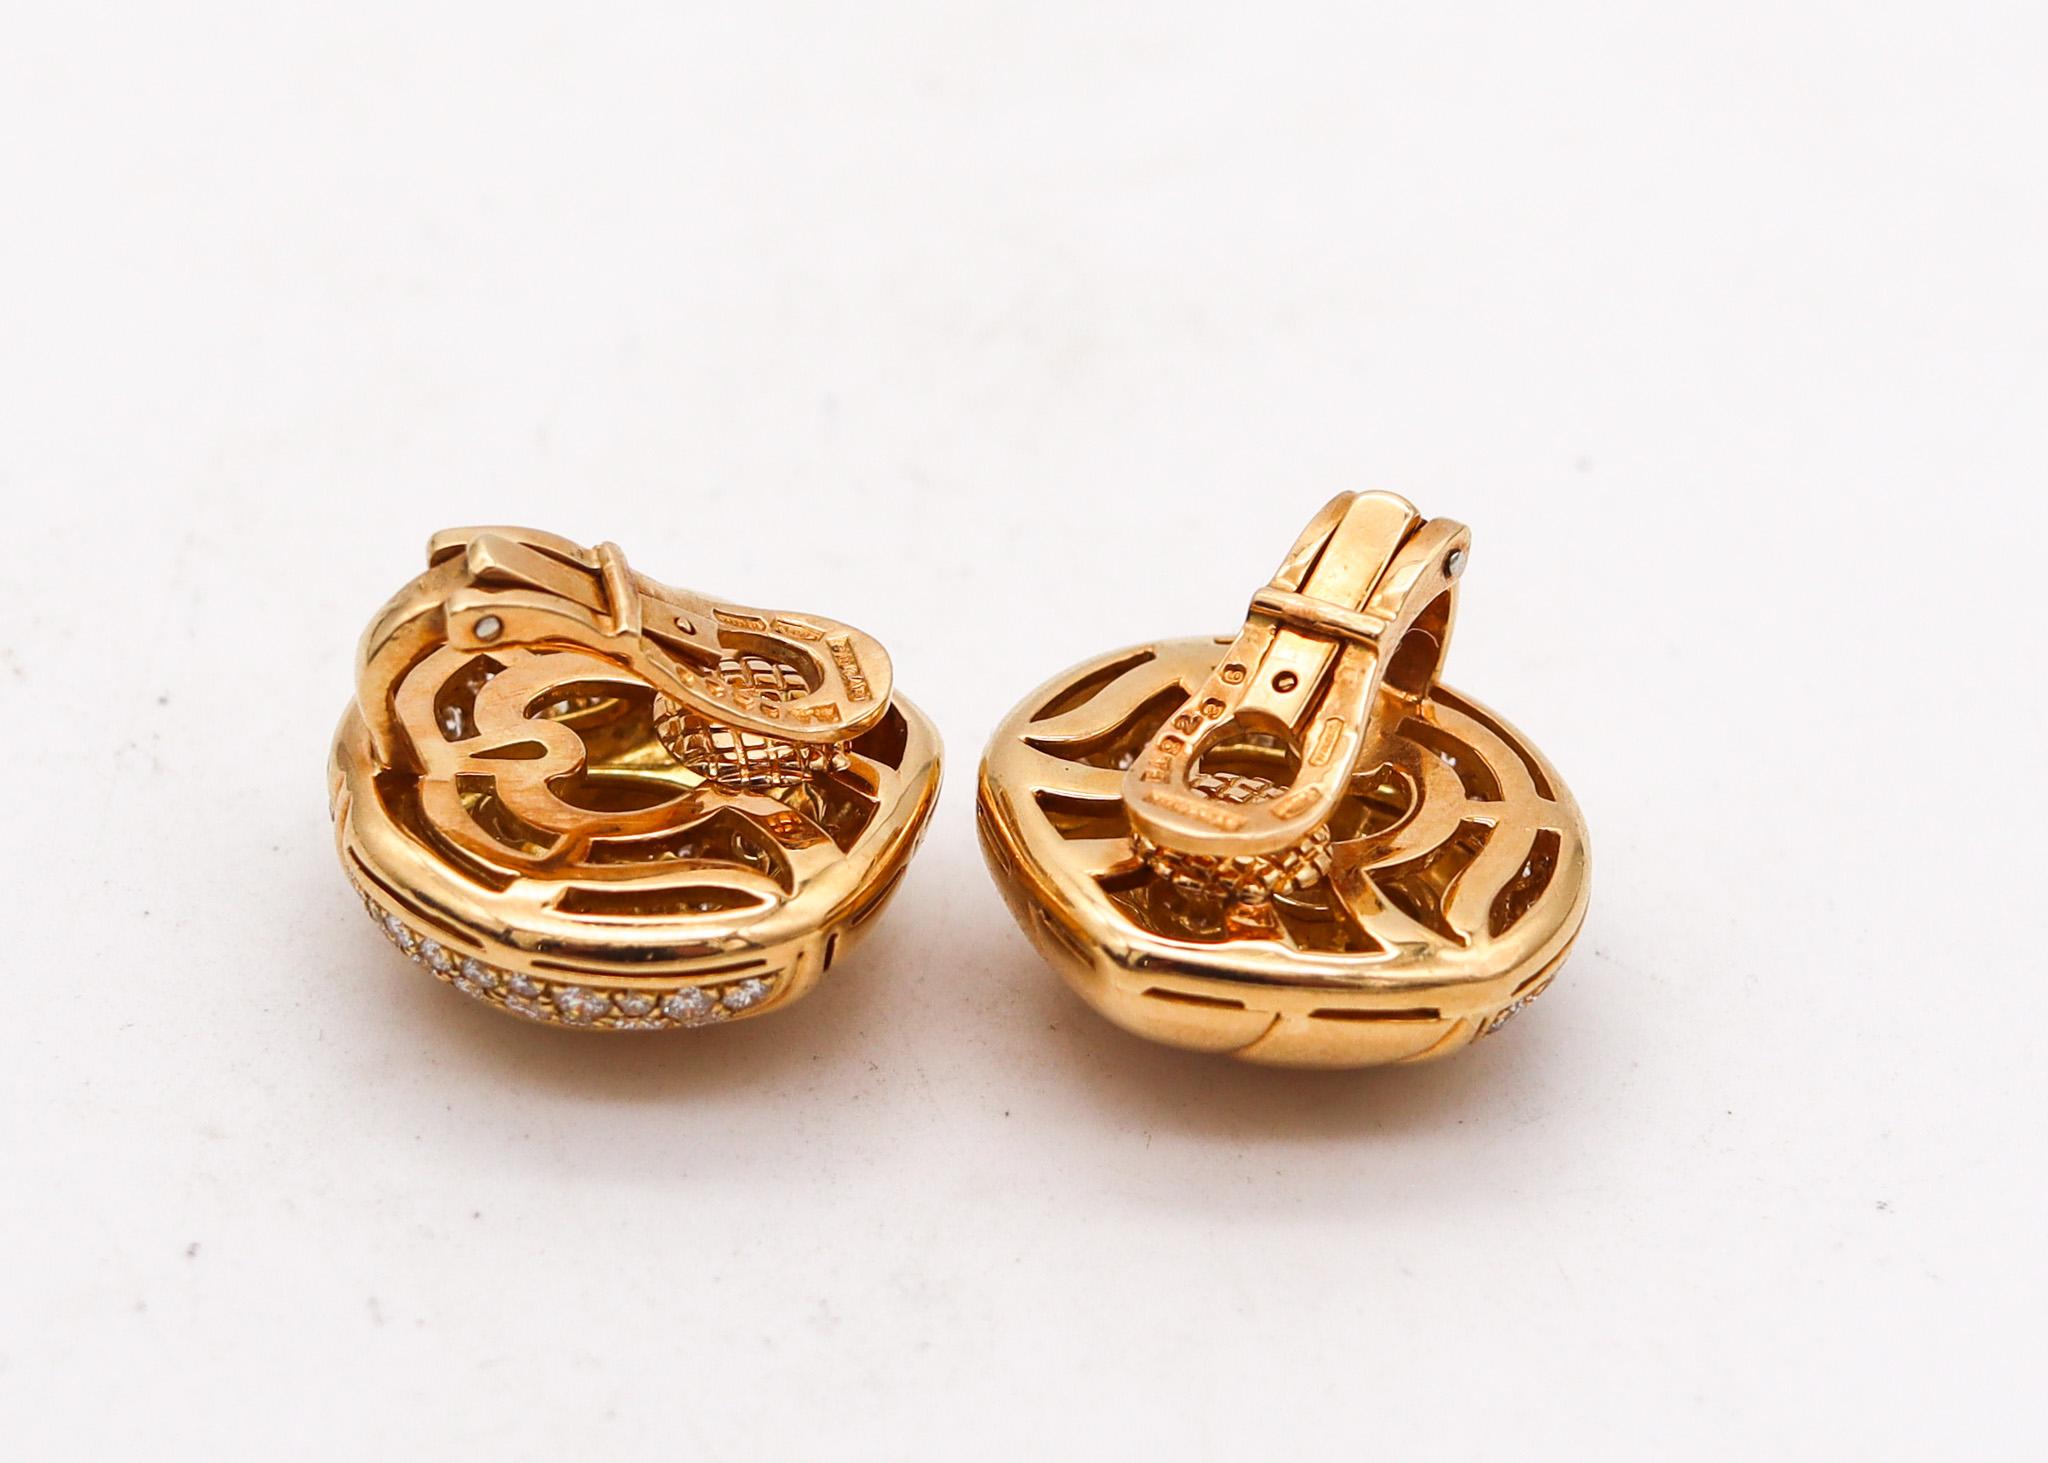 Brilliant Cut Bvlgari Roma Clips On Earrings In 18Kt Yellow Gold With 2.88 Cts In VS Diamonds For Sale